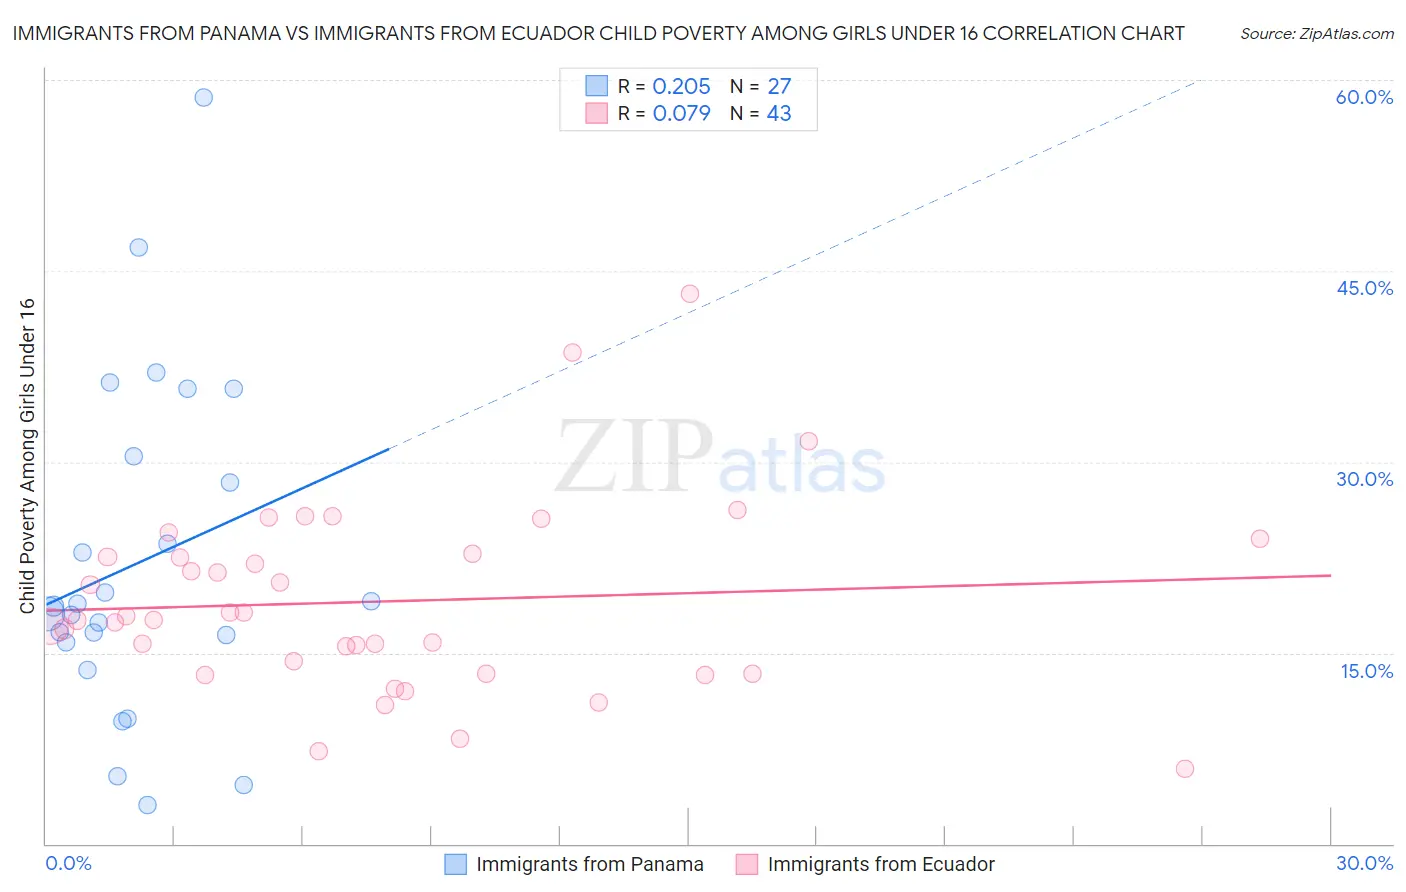 Immigrants from Panama vs Immigrants from Ecuador Child Poverty Among Girls Under 16